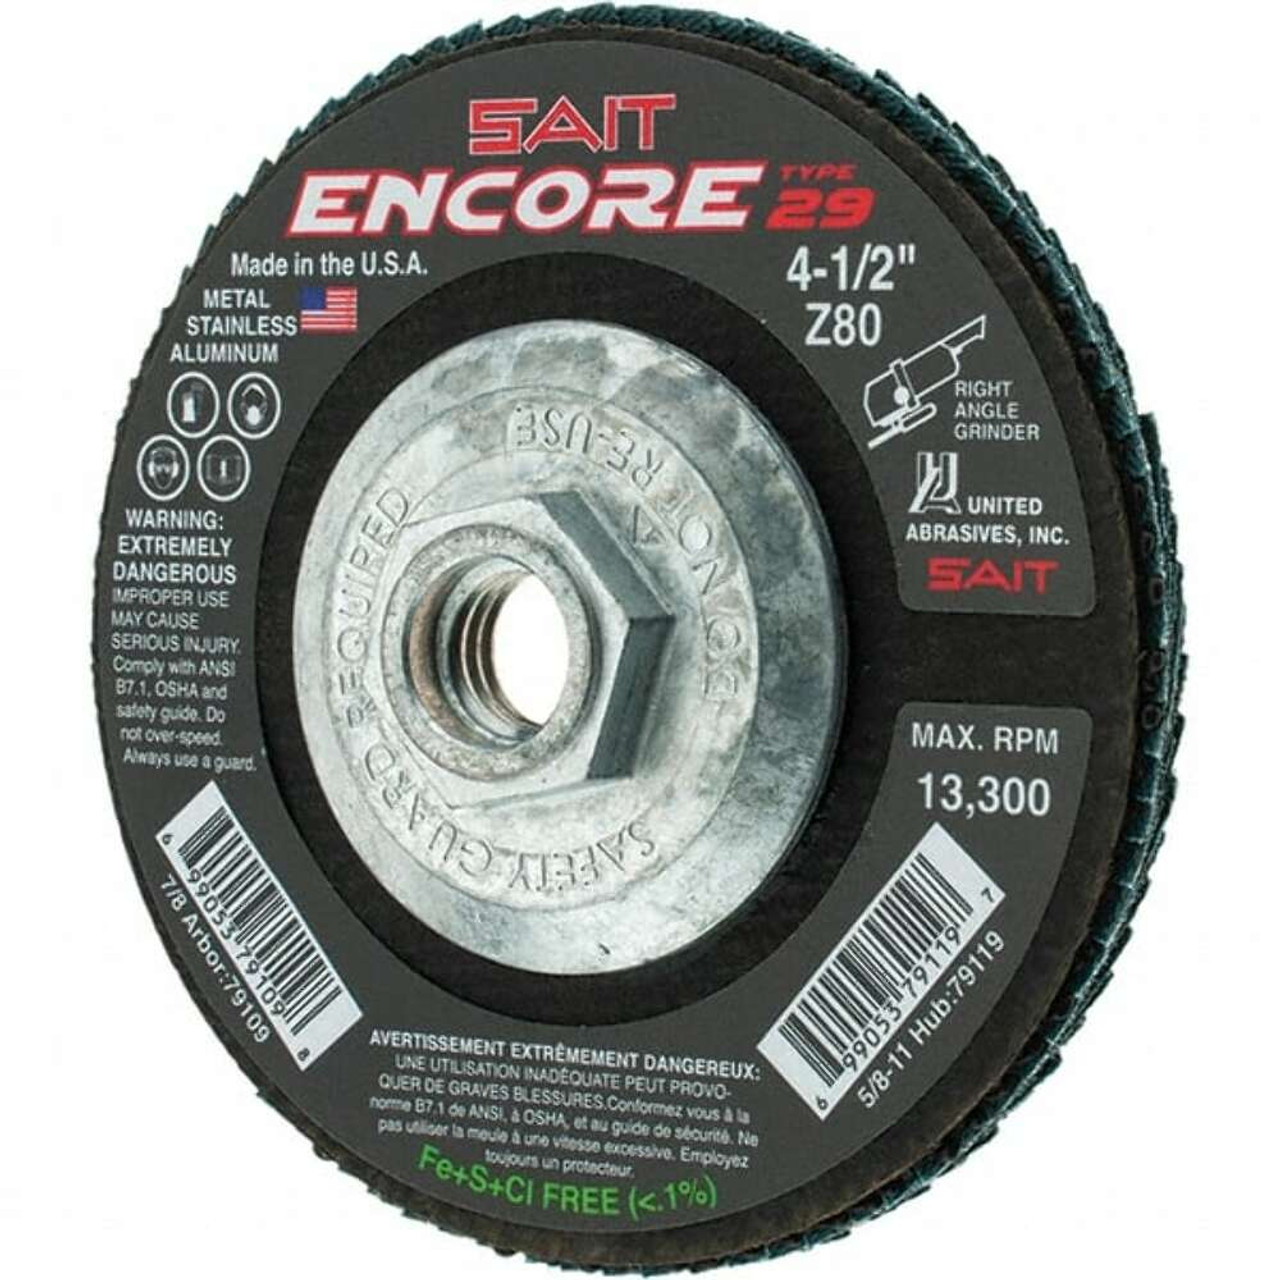 United Abrasives 79119 Encore Flap Disc 4-1/2 In. x 5/8-11 Type 29